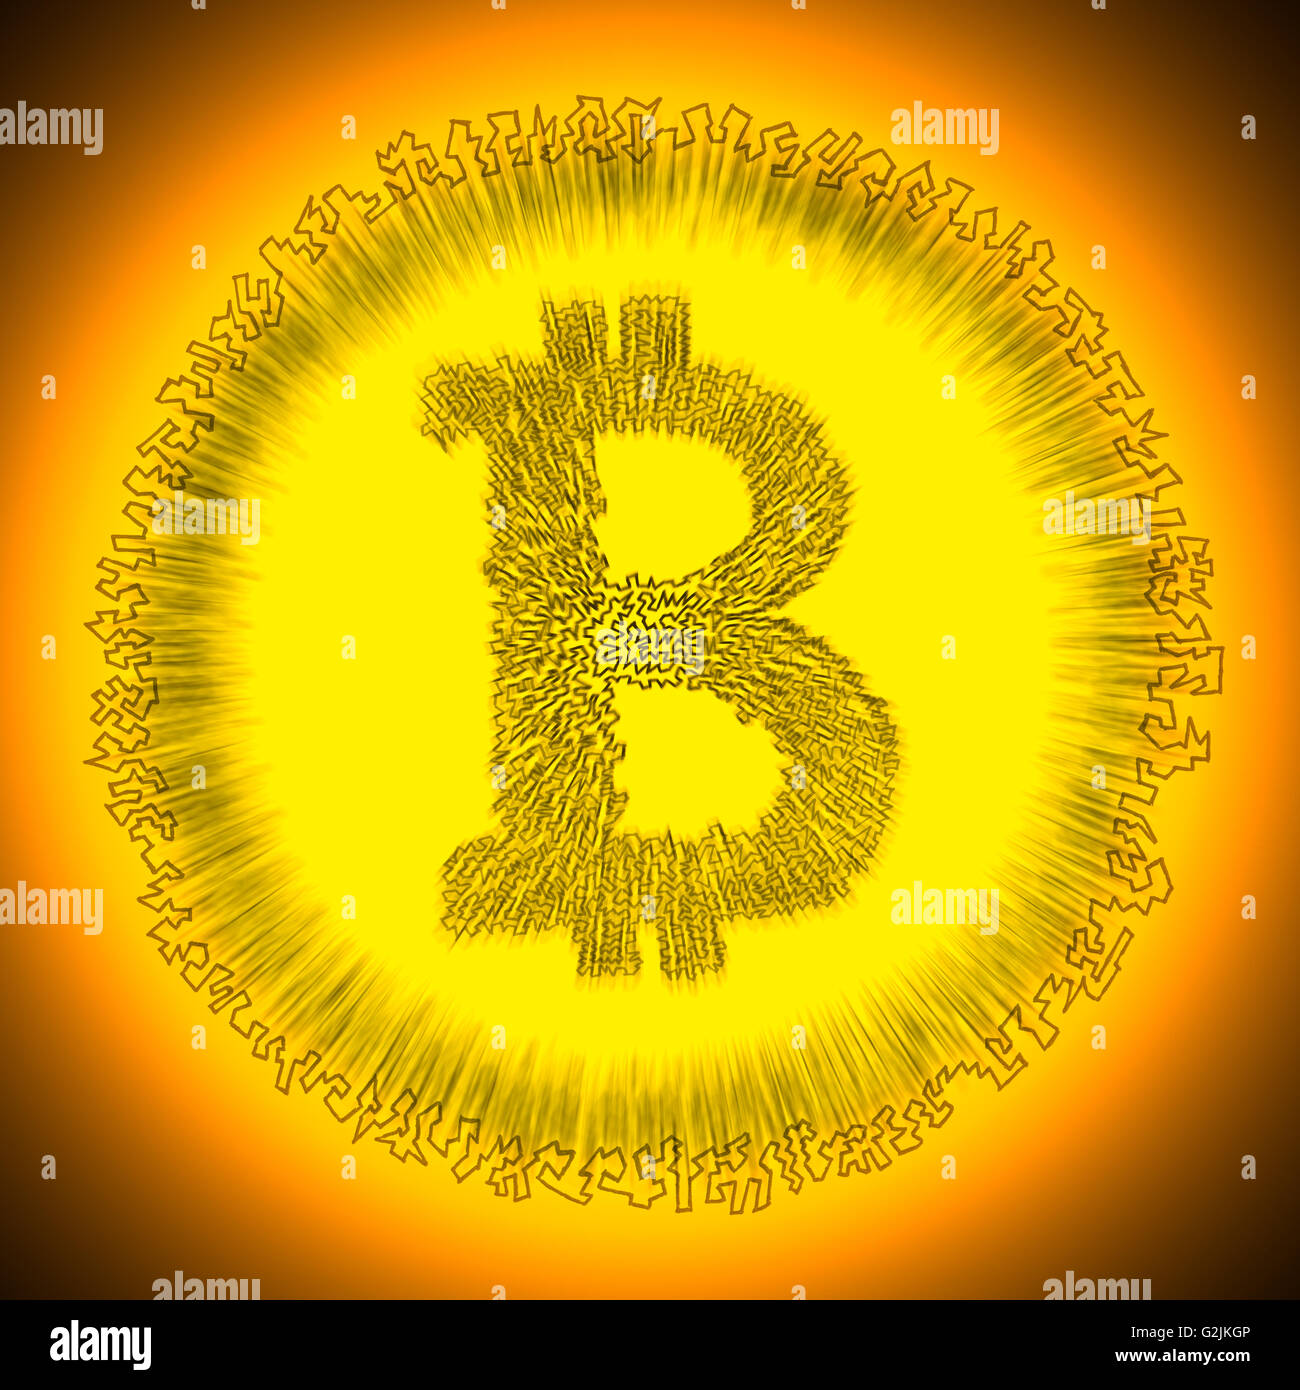 Serrated golden radiant Bitcoin logo. Illustration of a digital decentralized cryptocurrency coin. Stock Photo